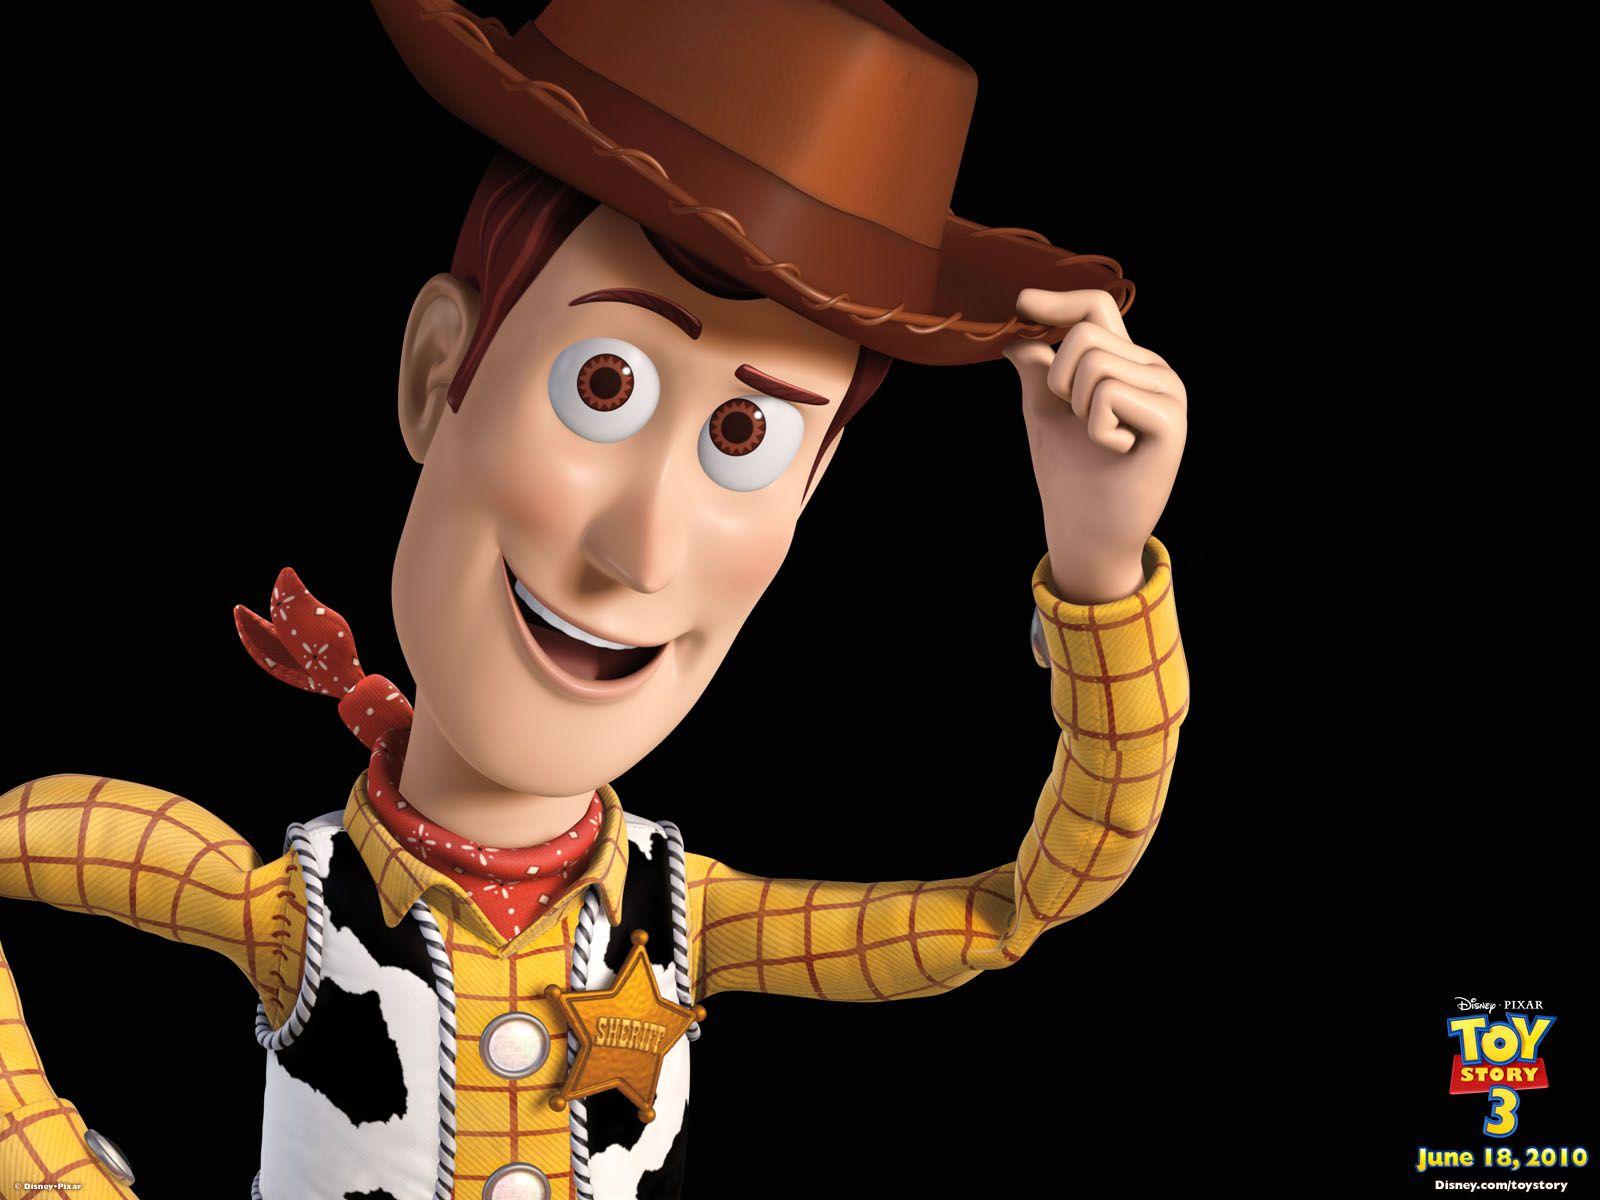 Toy Story Live Wallpaper download latest APK 103 for Android